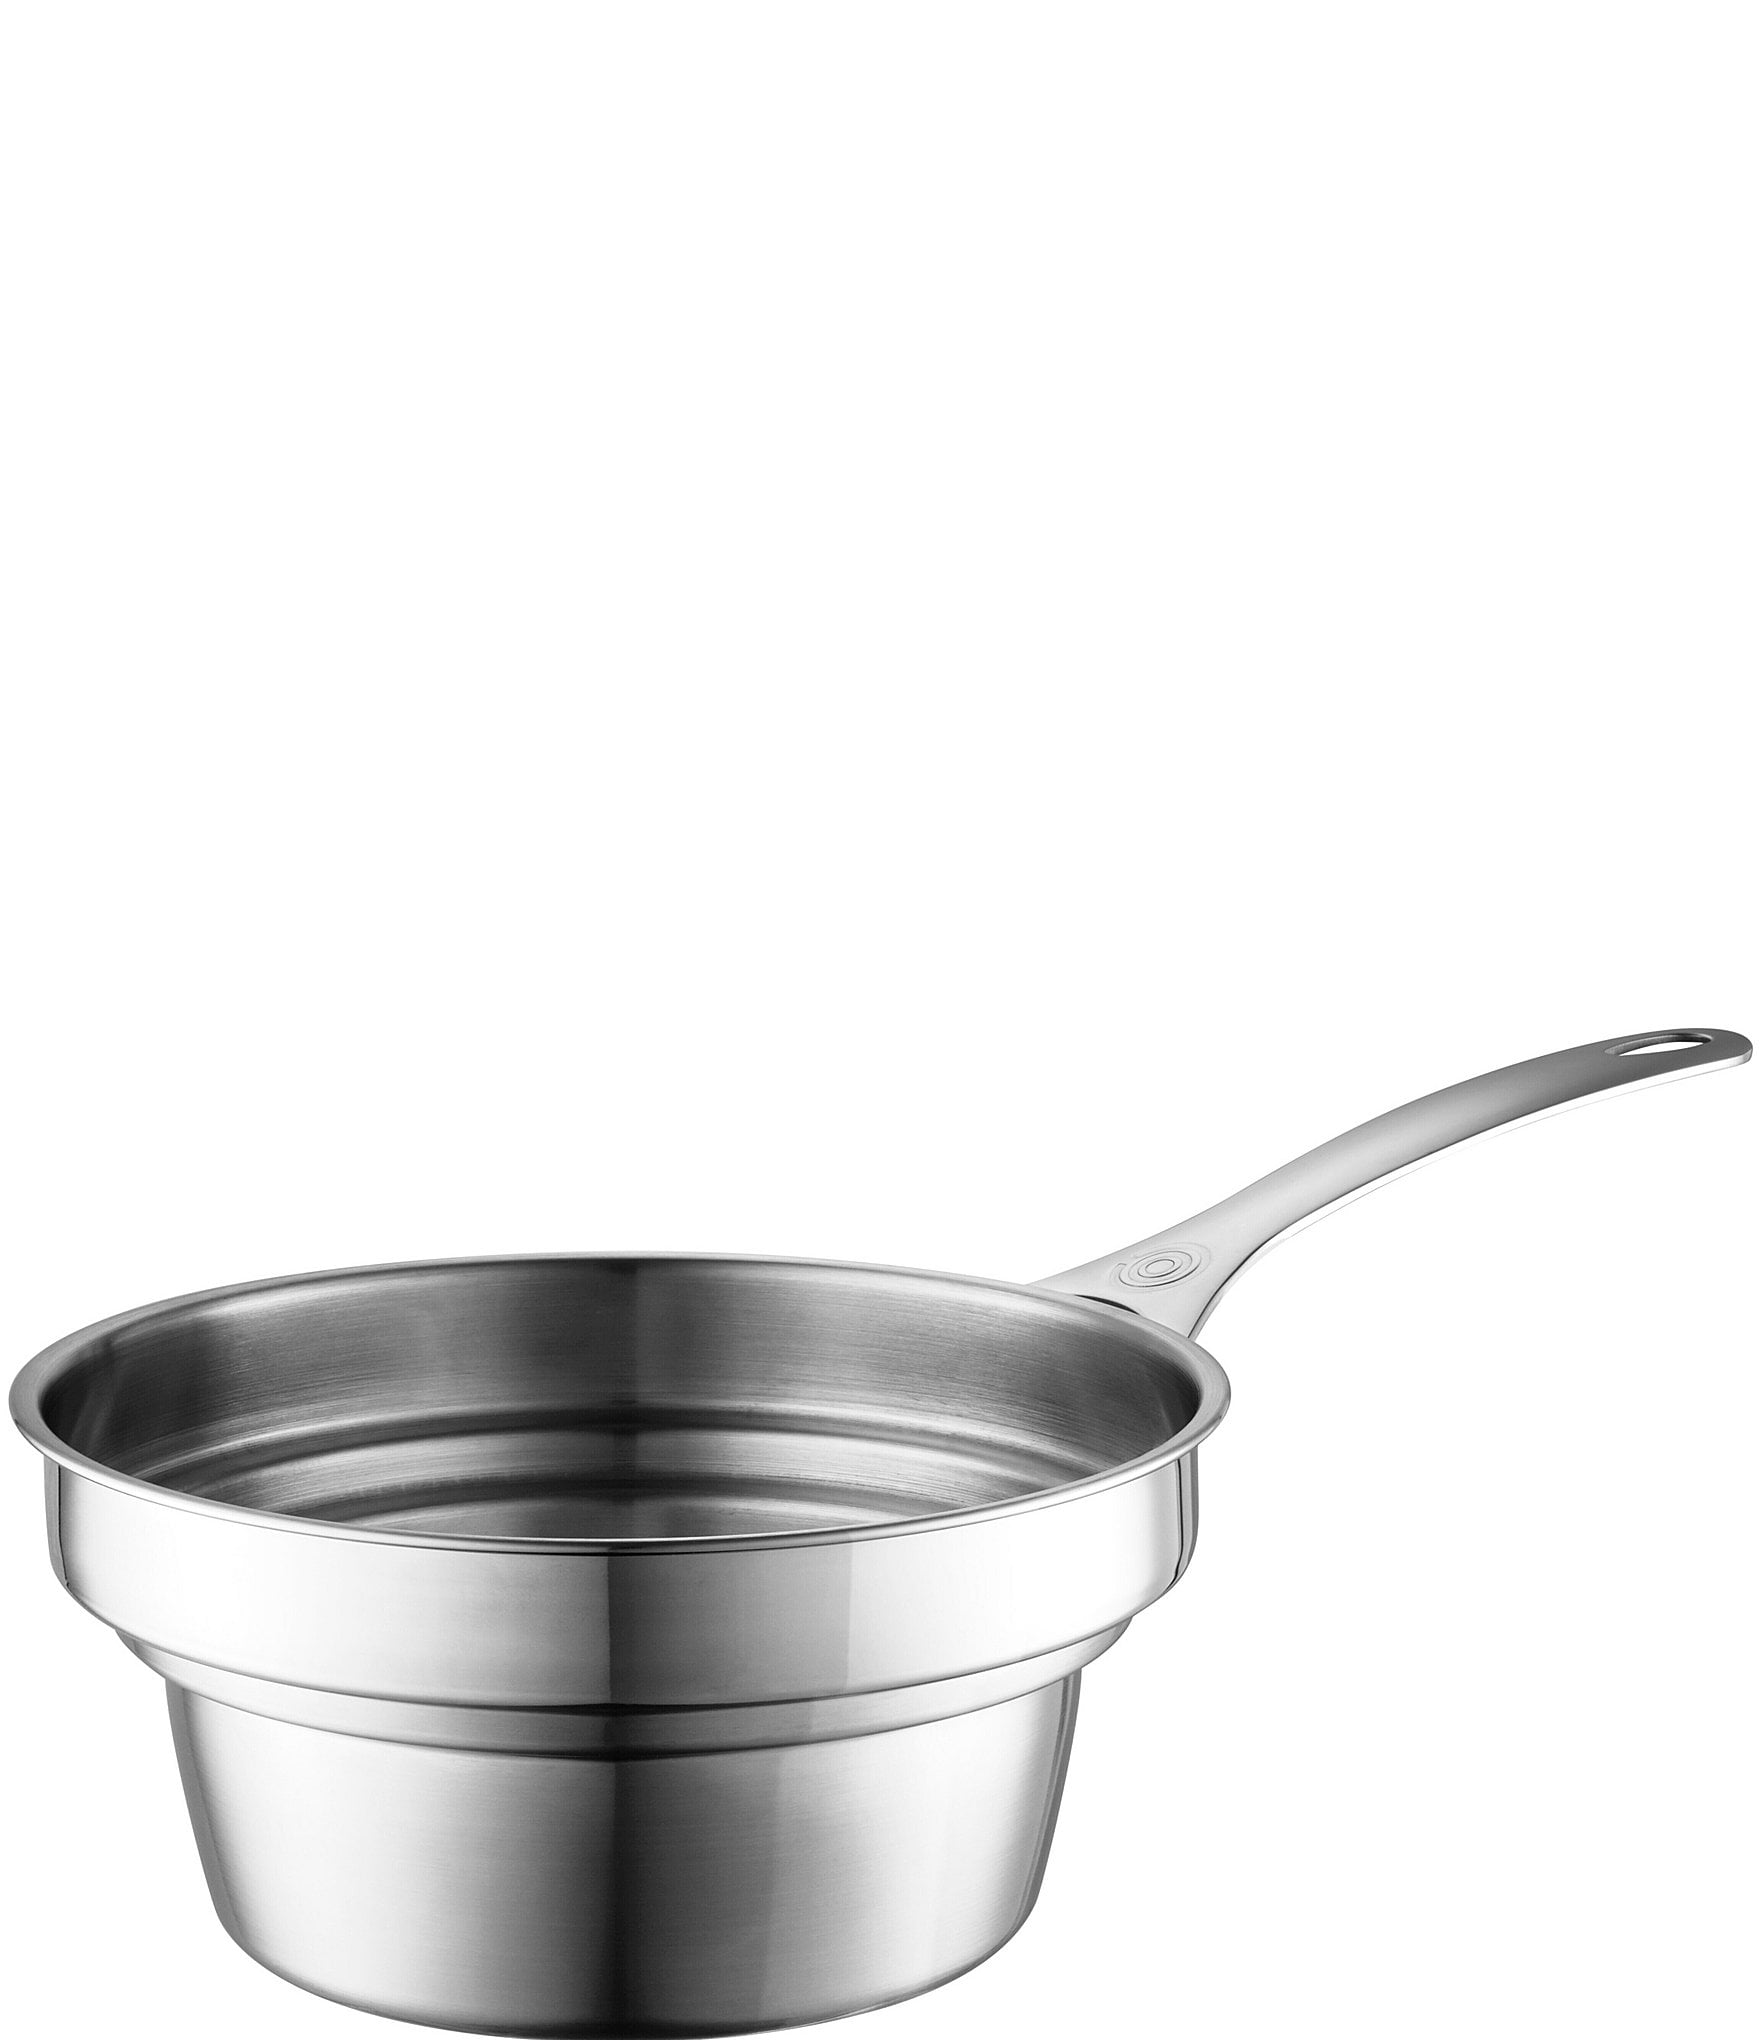 American Kitchen 2-quart Premium Stainless Steel Saucepan with Double  Boiler Insert and Cover